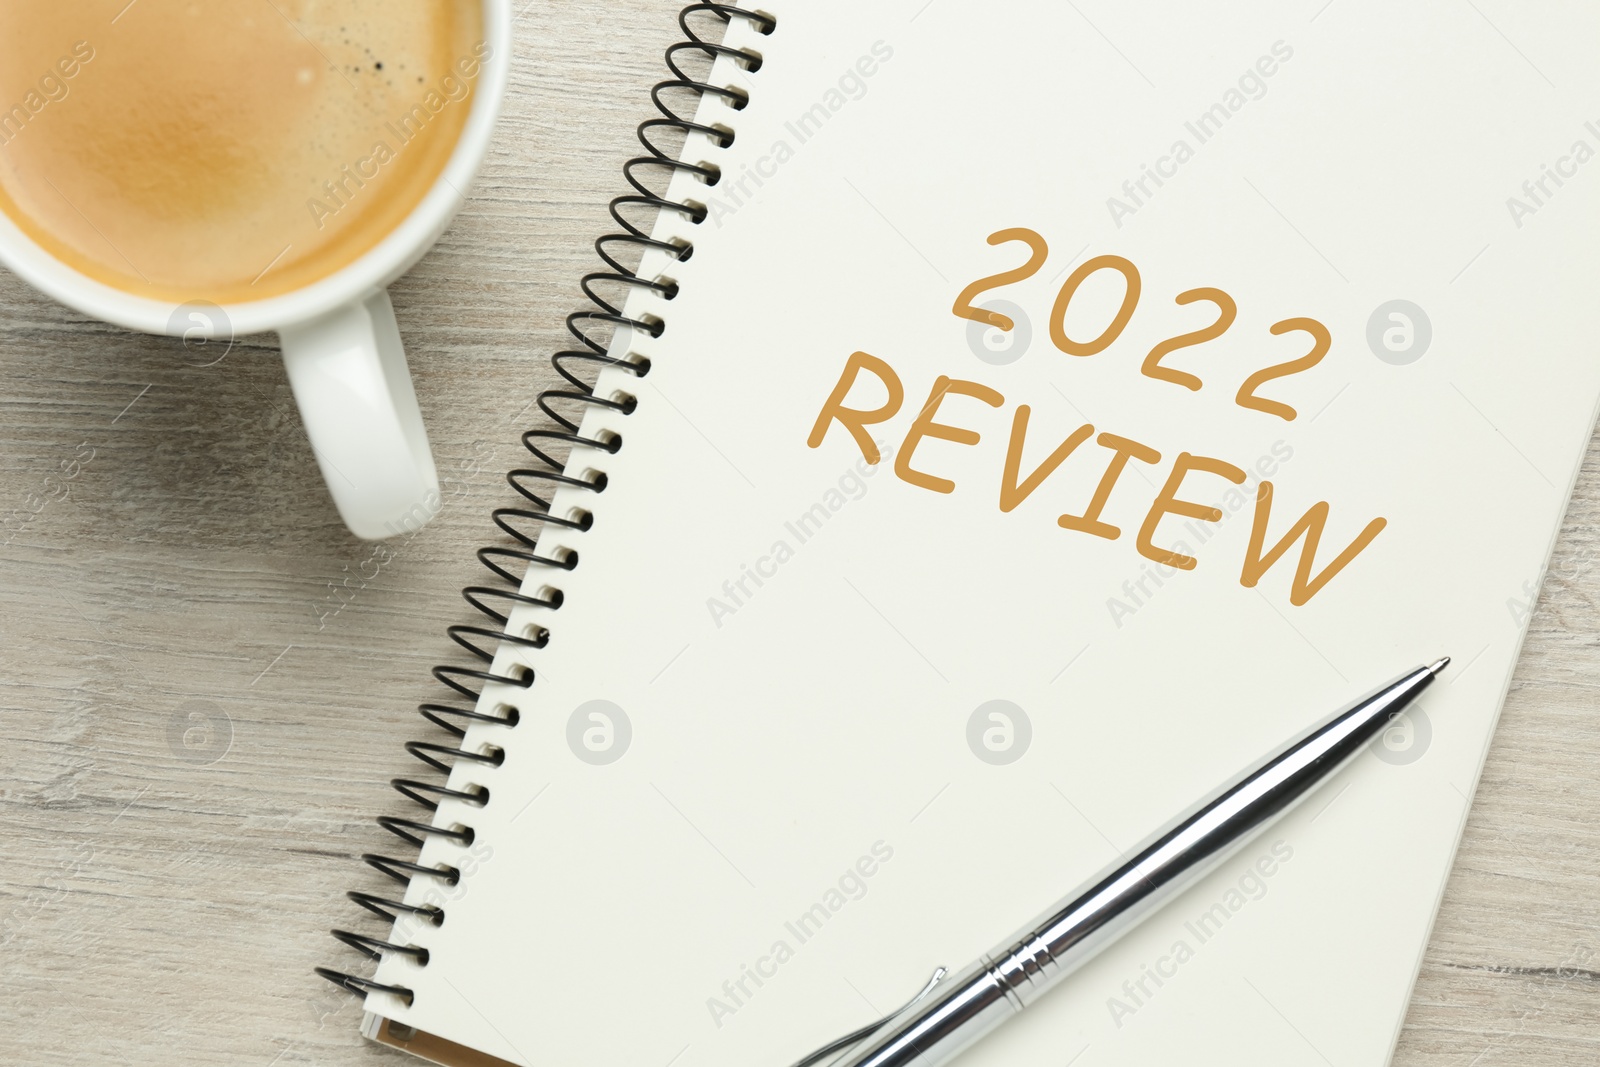 Image of Text 2022 Review written in notebook, pen and cup of coffee on wooden table, top view